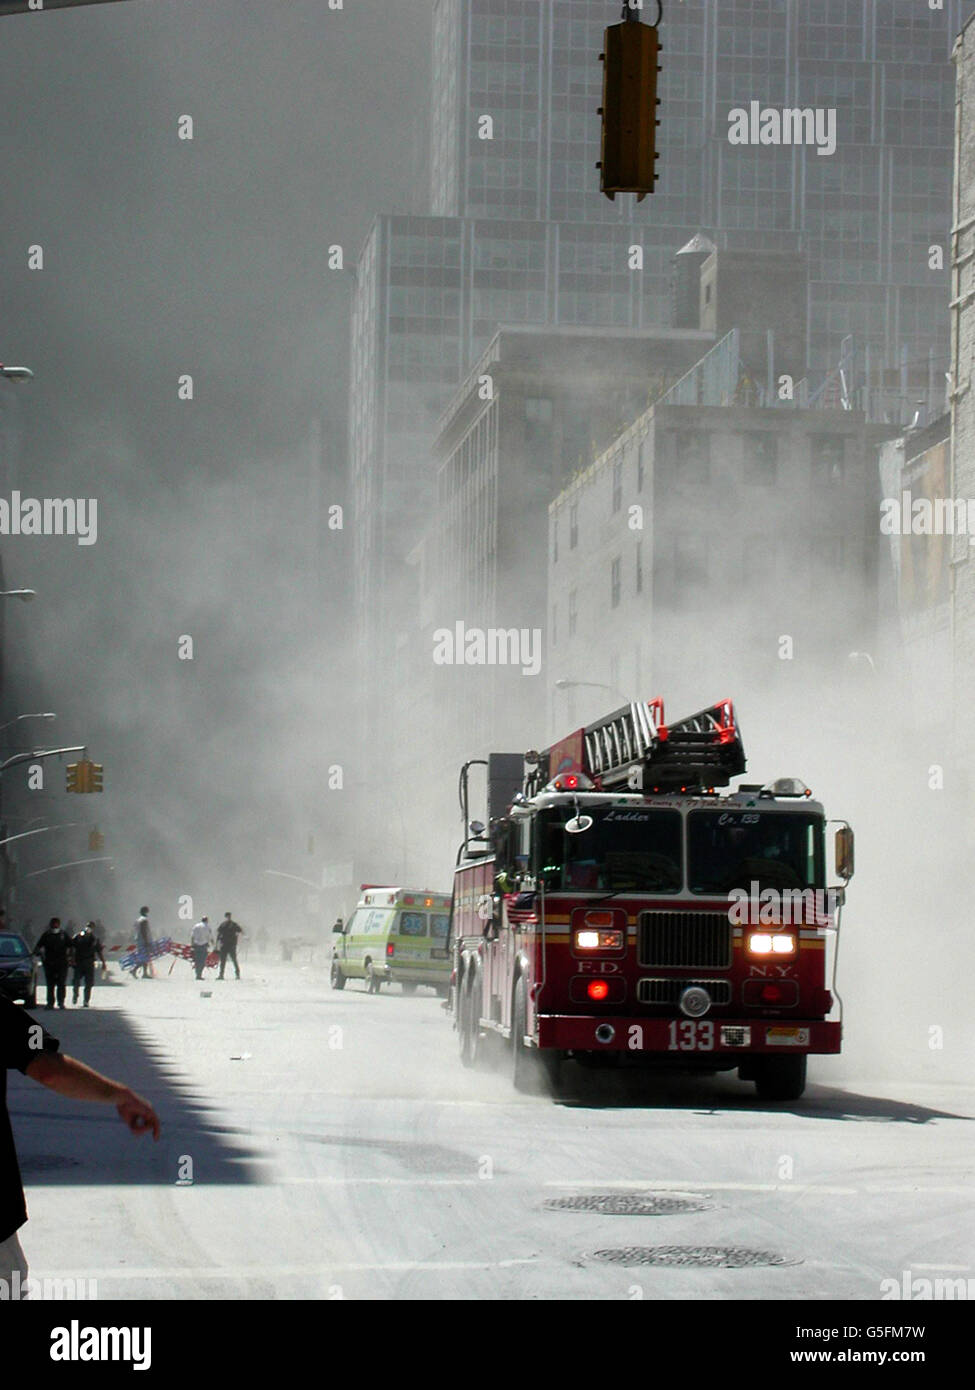 A fire engine ploughs through the dust in the immediate aftermath of the destruction of the World Trade Centre in New York Rescue workers, will face an enormous task in recovering the bodies of those killed in the attacks on the World Trade Centre and the Pentagon in Washington. Stock Photo